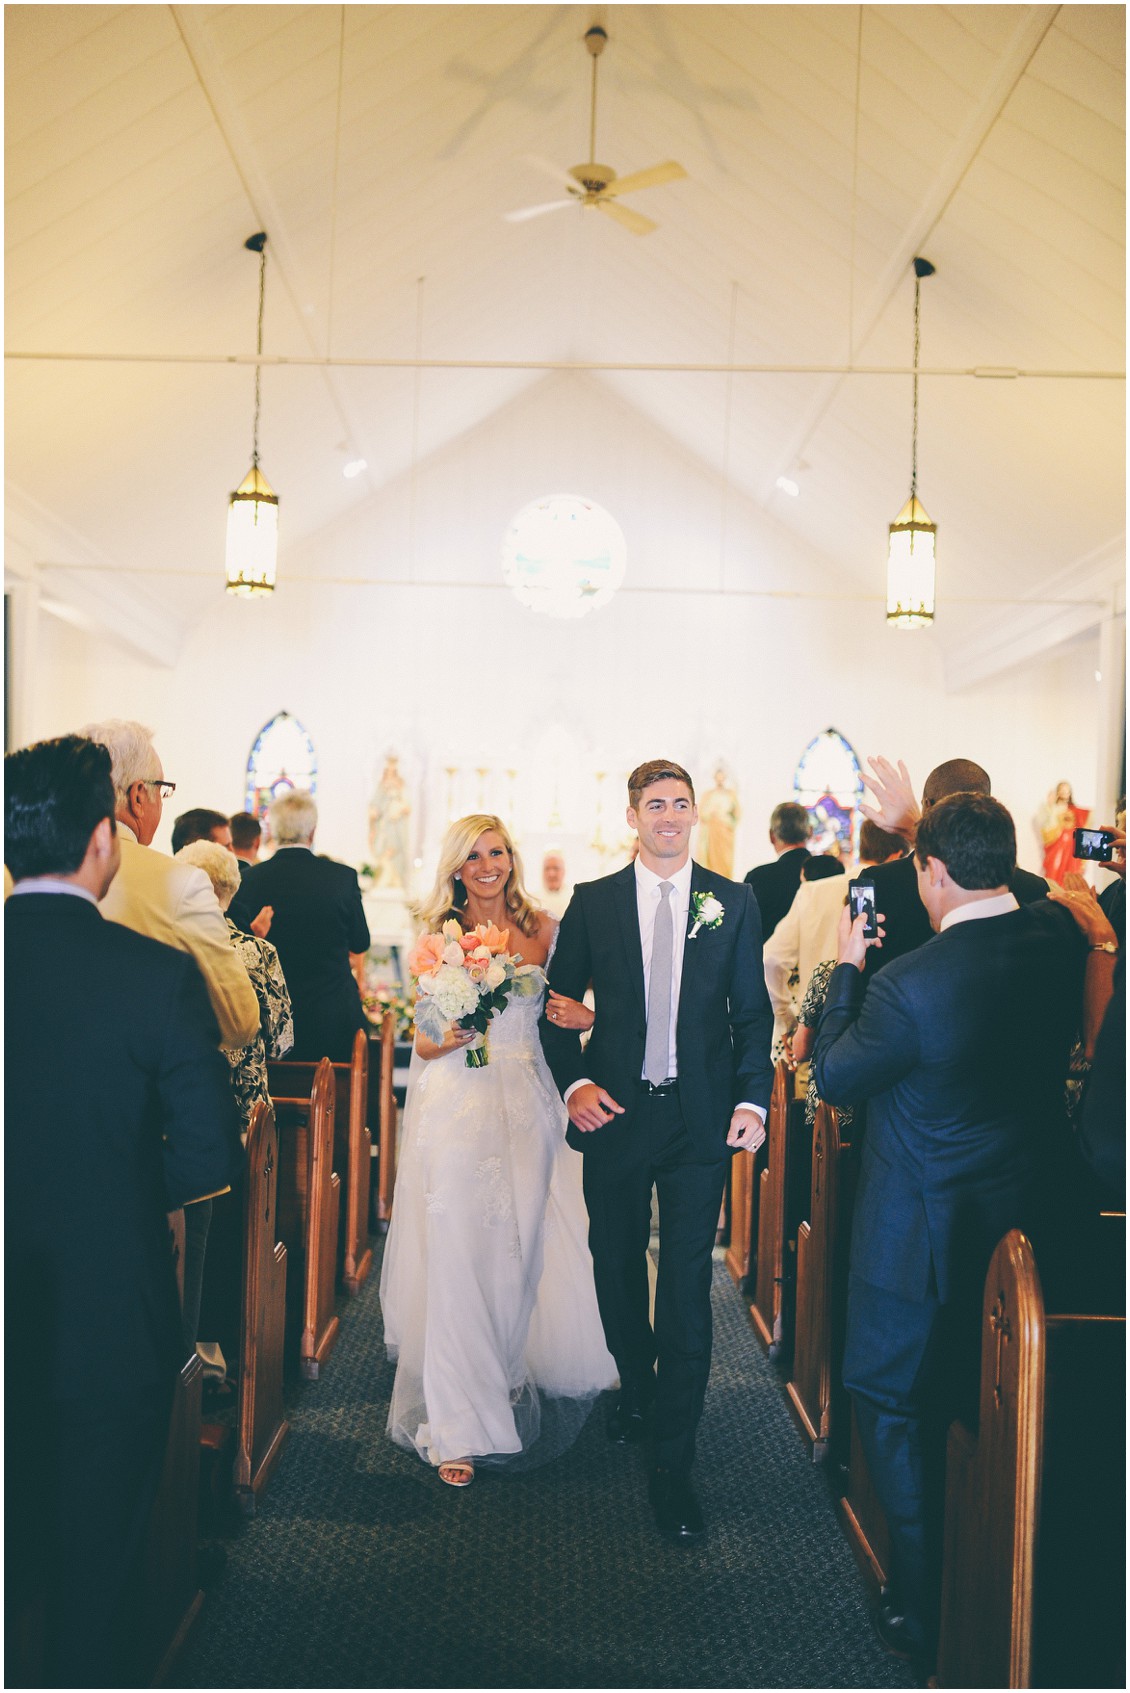 Bride and groom walking down the aisle together after the ceremony. | My Eastern Shore Wedding | 